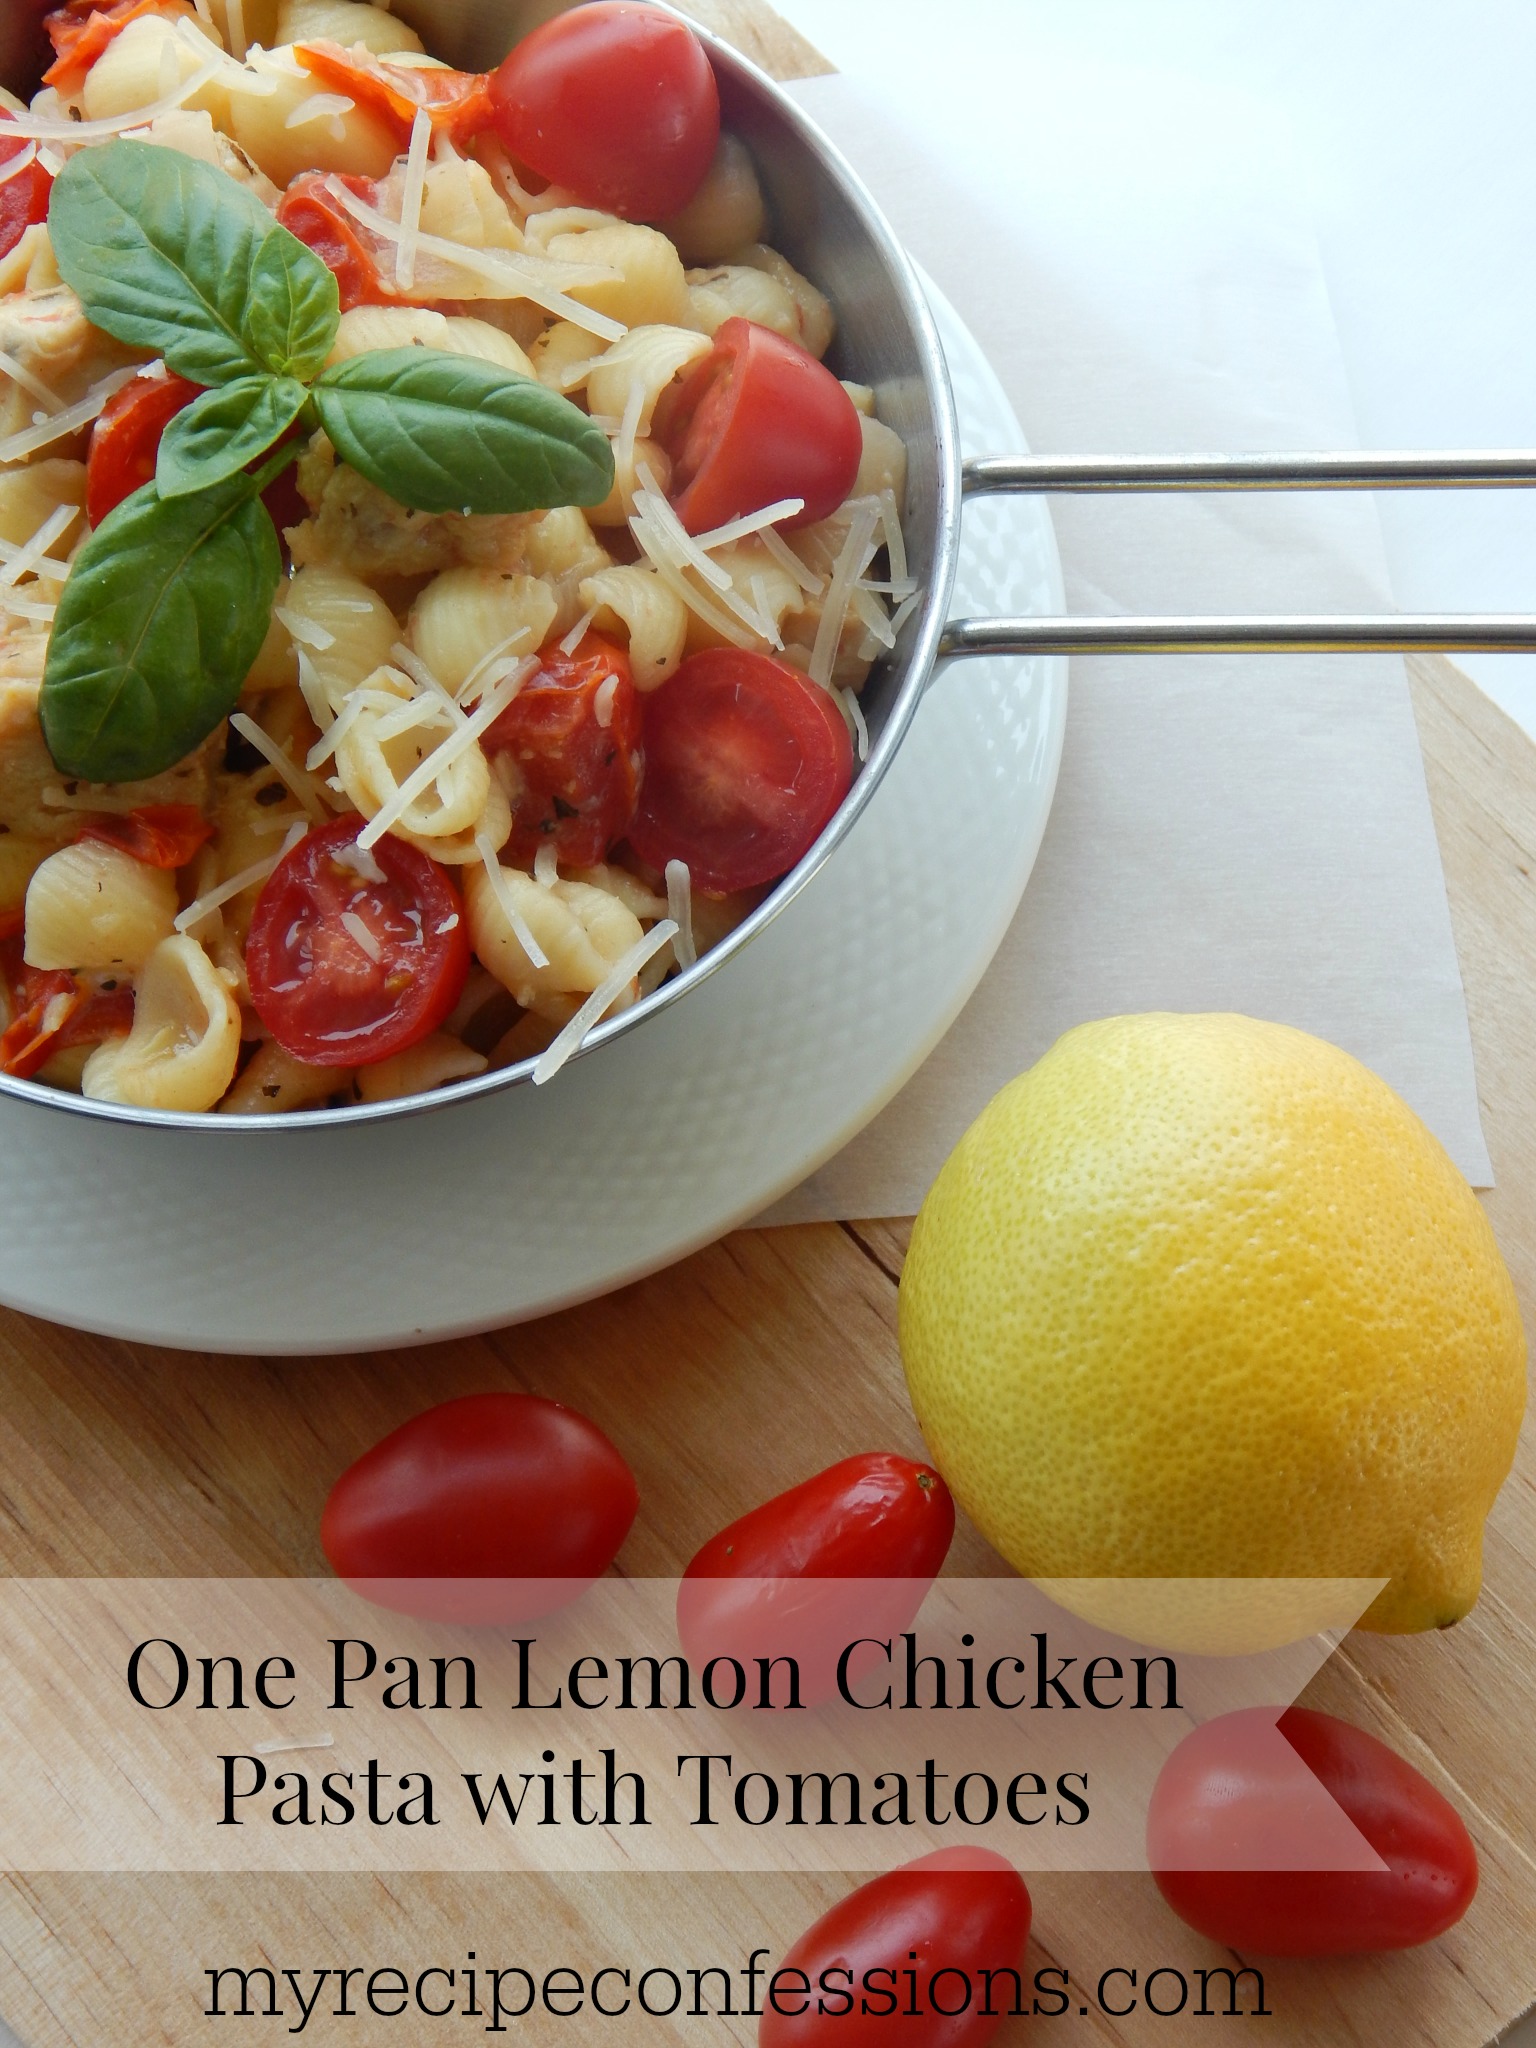 One Pan Lemon Chicken Pasta with Tomatoes